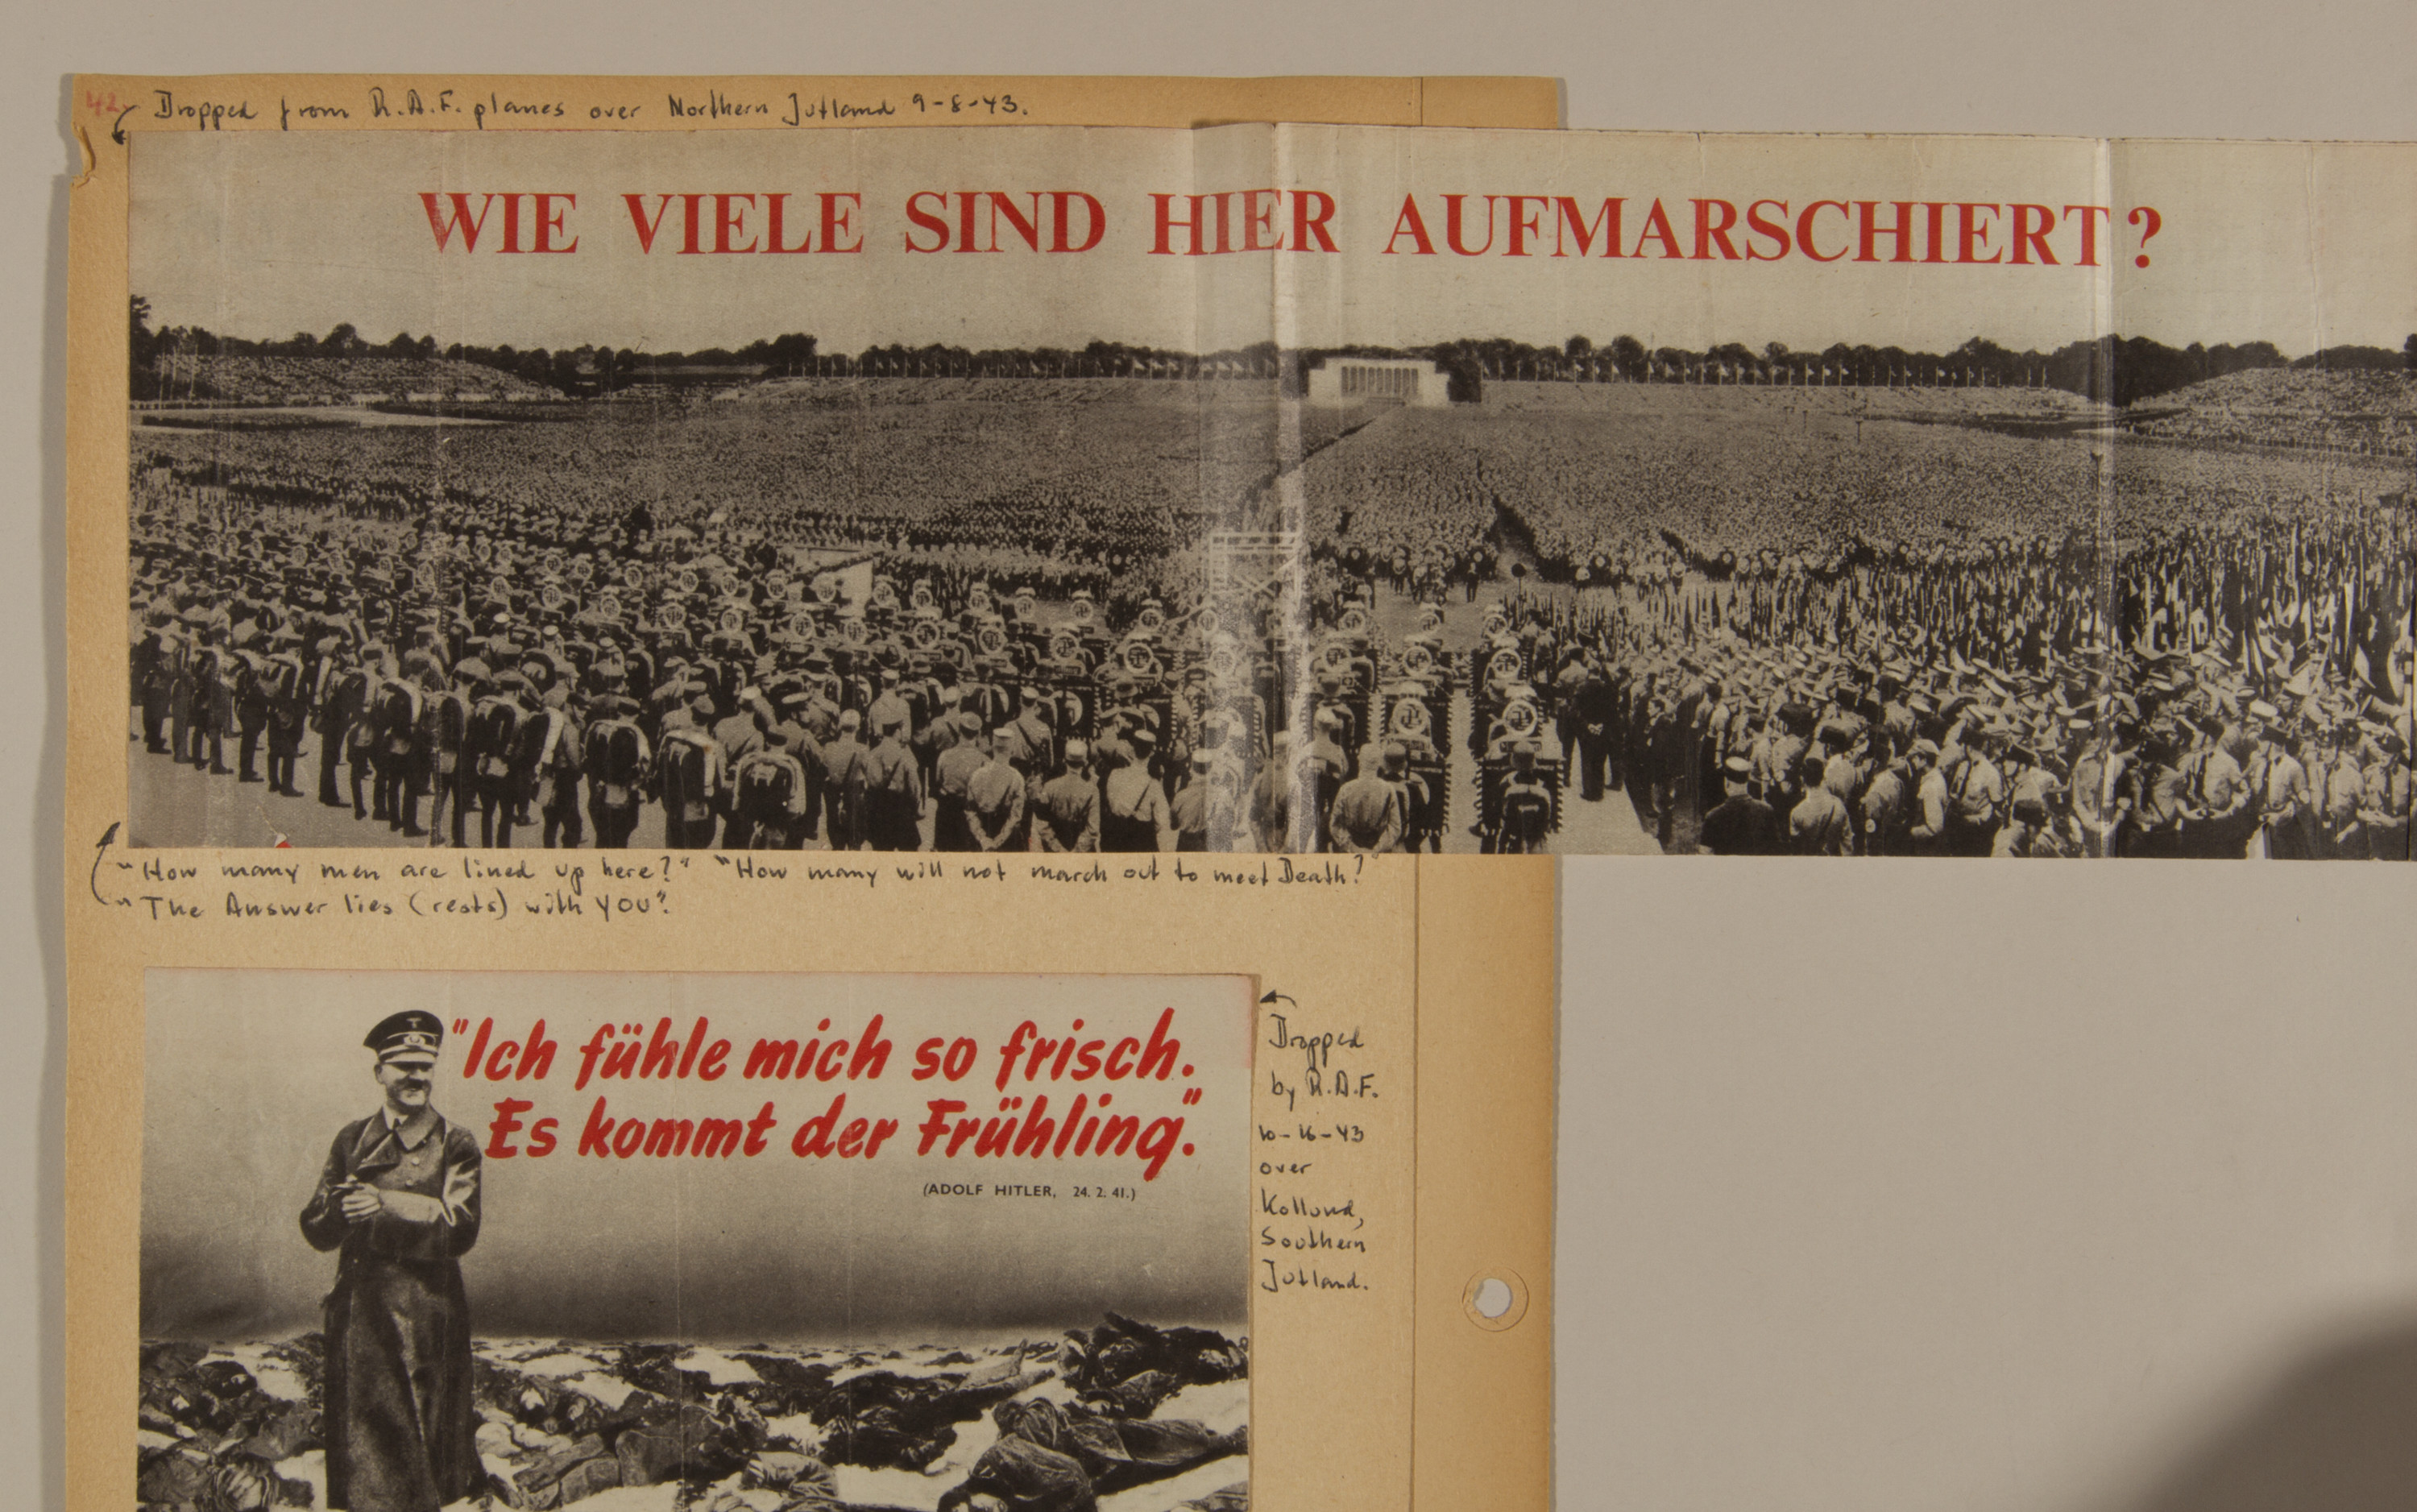 Page from volume two of a set of scrapbooks compiled by Bjorn Sibbern, a Danish policeman and resistance member, documenting the German occupation of Denmark.

This page contains anti-Nazi handbills air-dropped over Denmark.